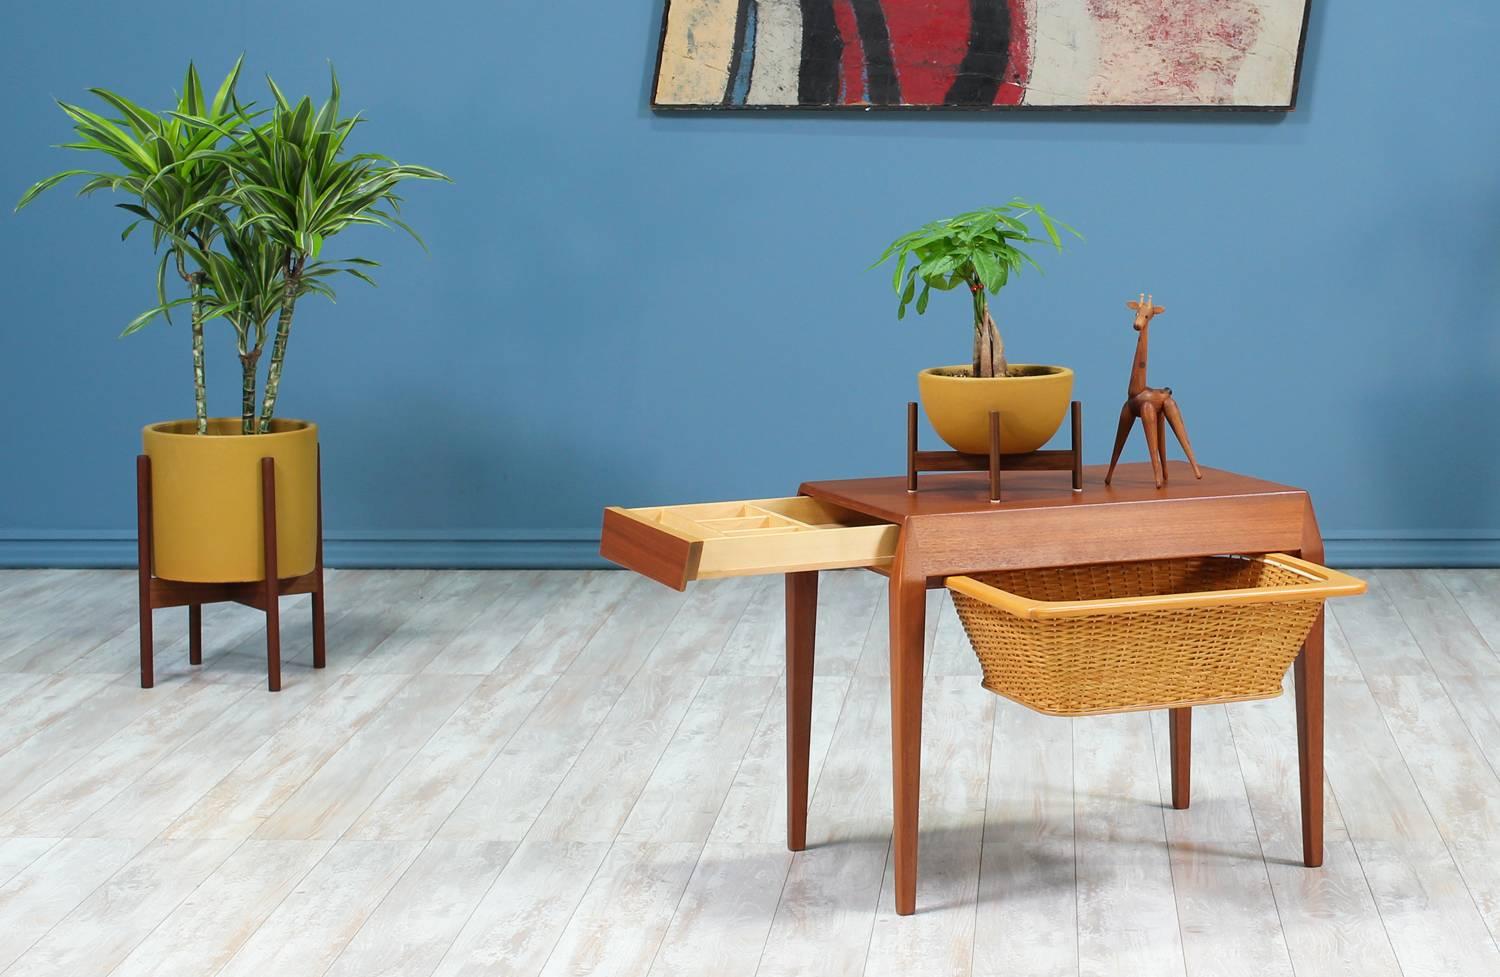 Sewing Table designed by Werner Fredriksen for Eric Gustavsson Möbelfabrik in Sweden circa 1960’s. This Swedish Modern design features a teak wood frame with beveled edges and its original pull-out wicker basket. The left side features a